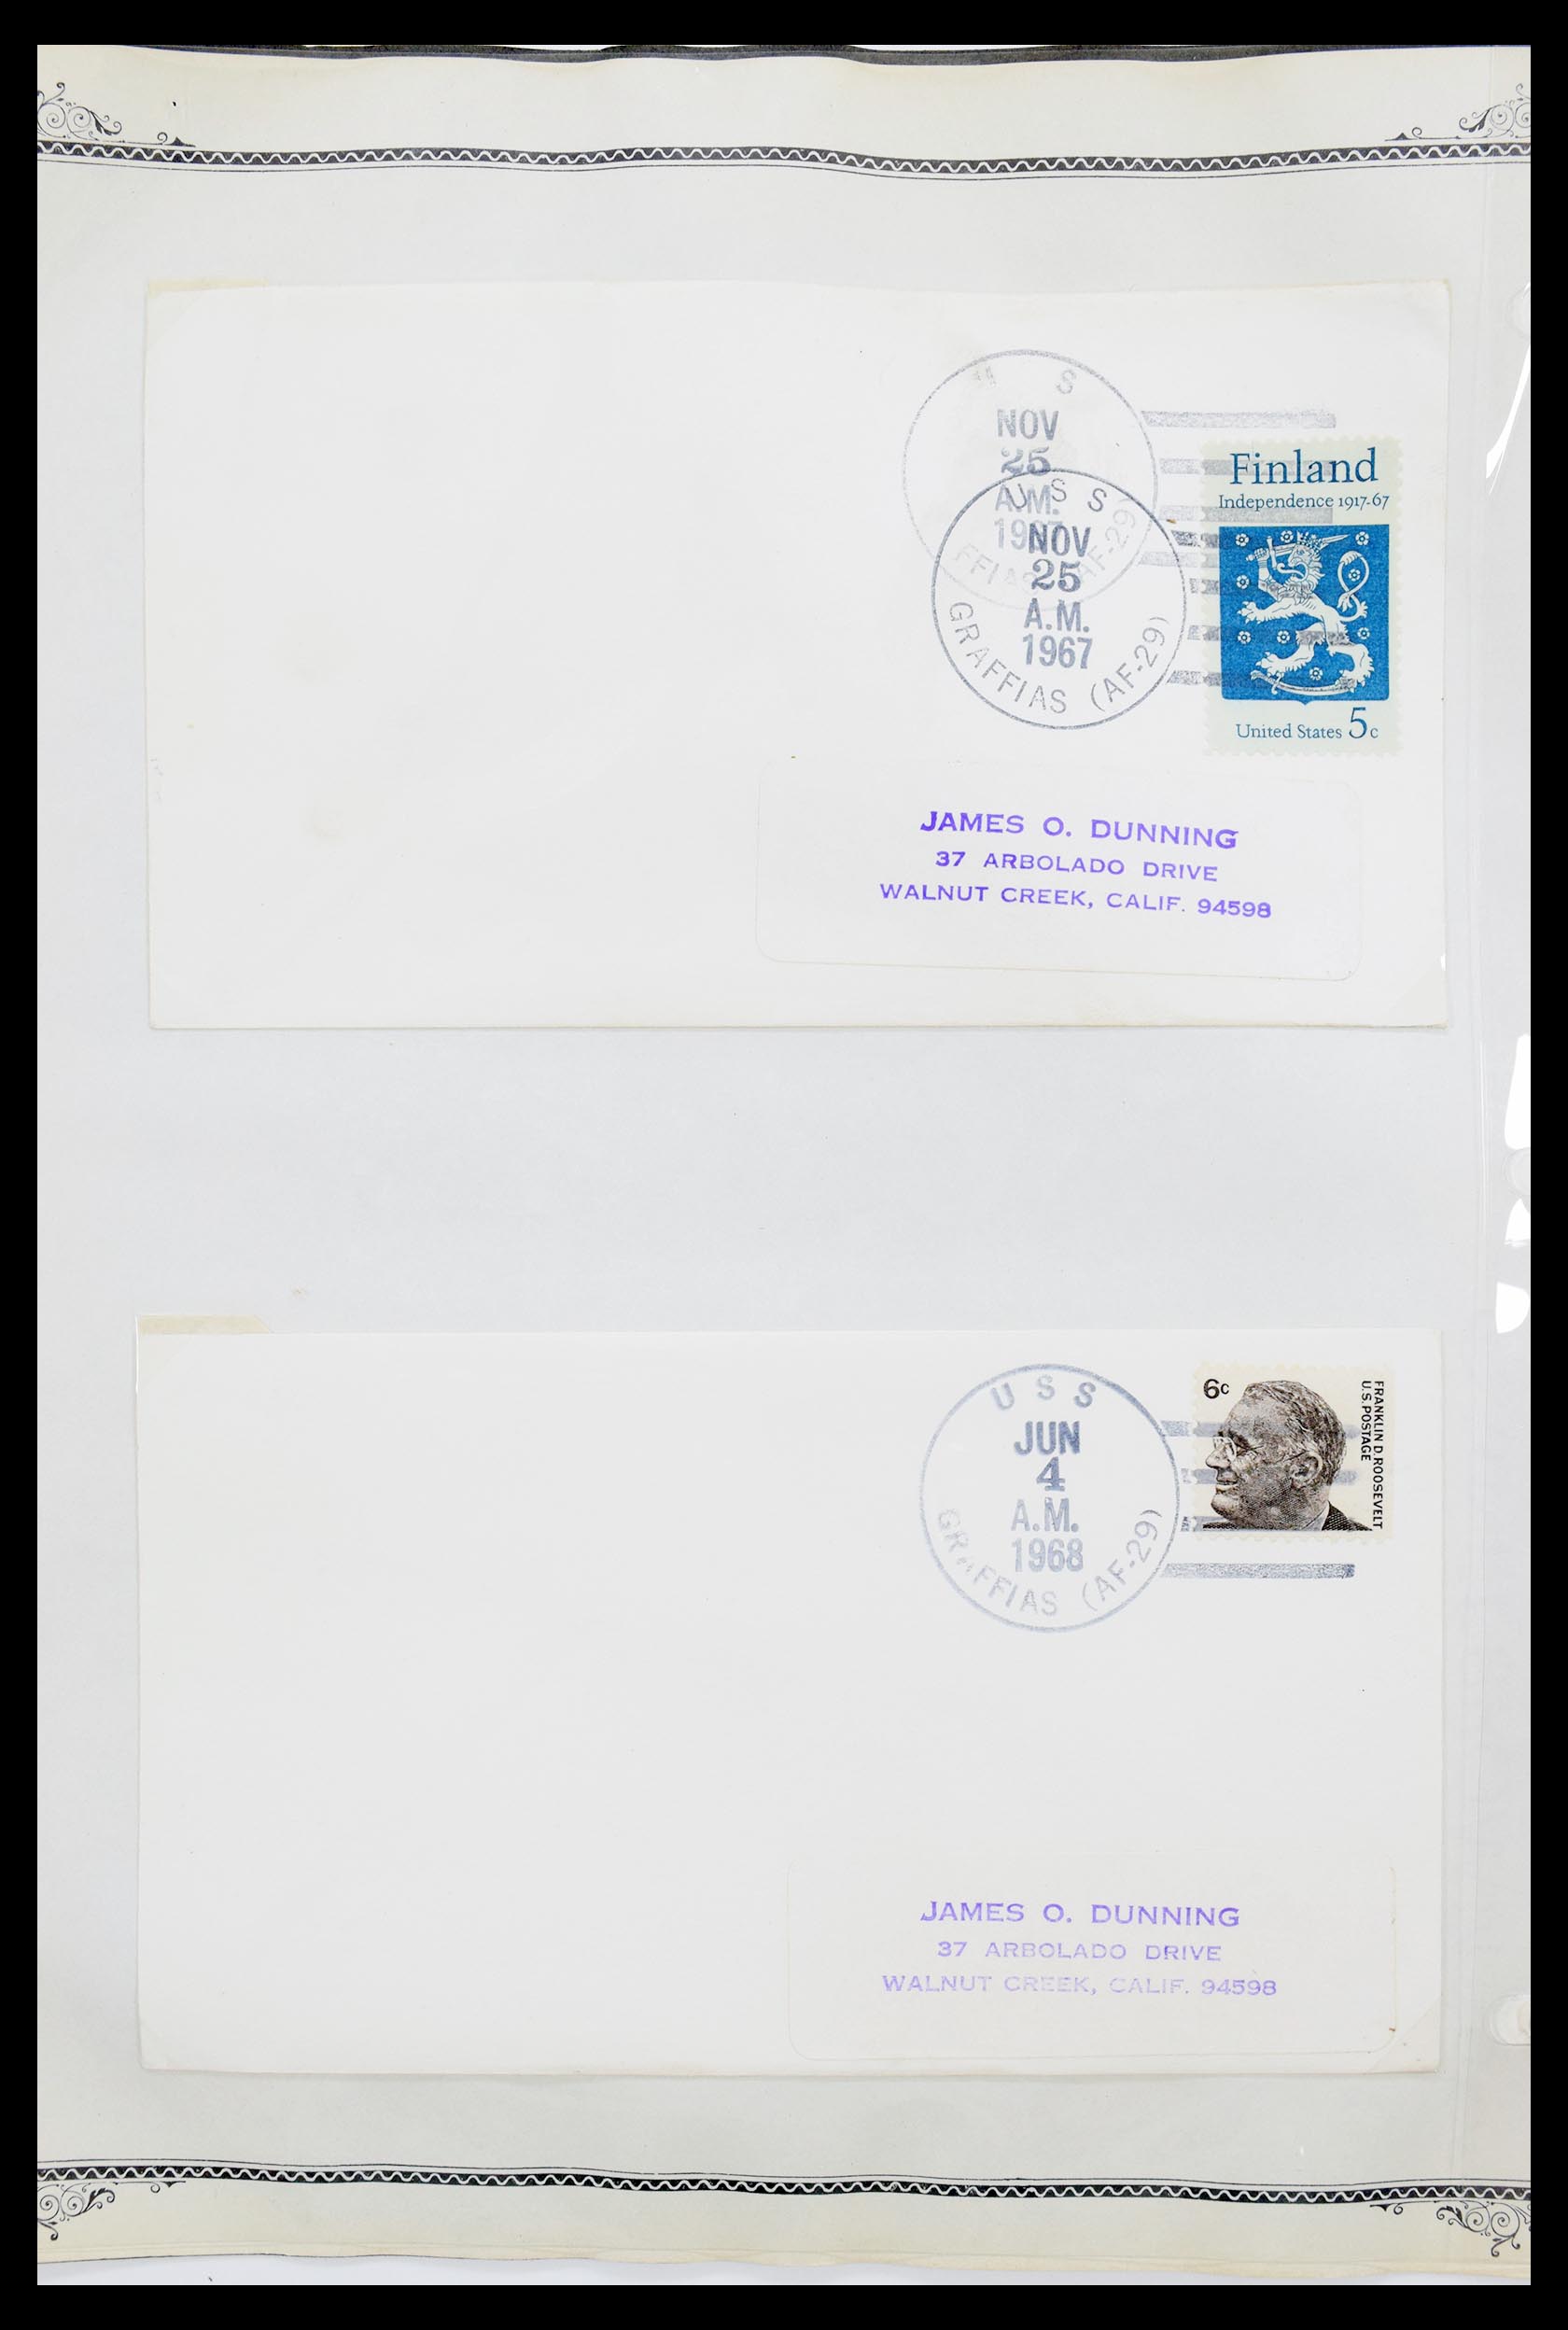 30341 025 - 30341 USA naval cover collection 1930-1970.